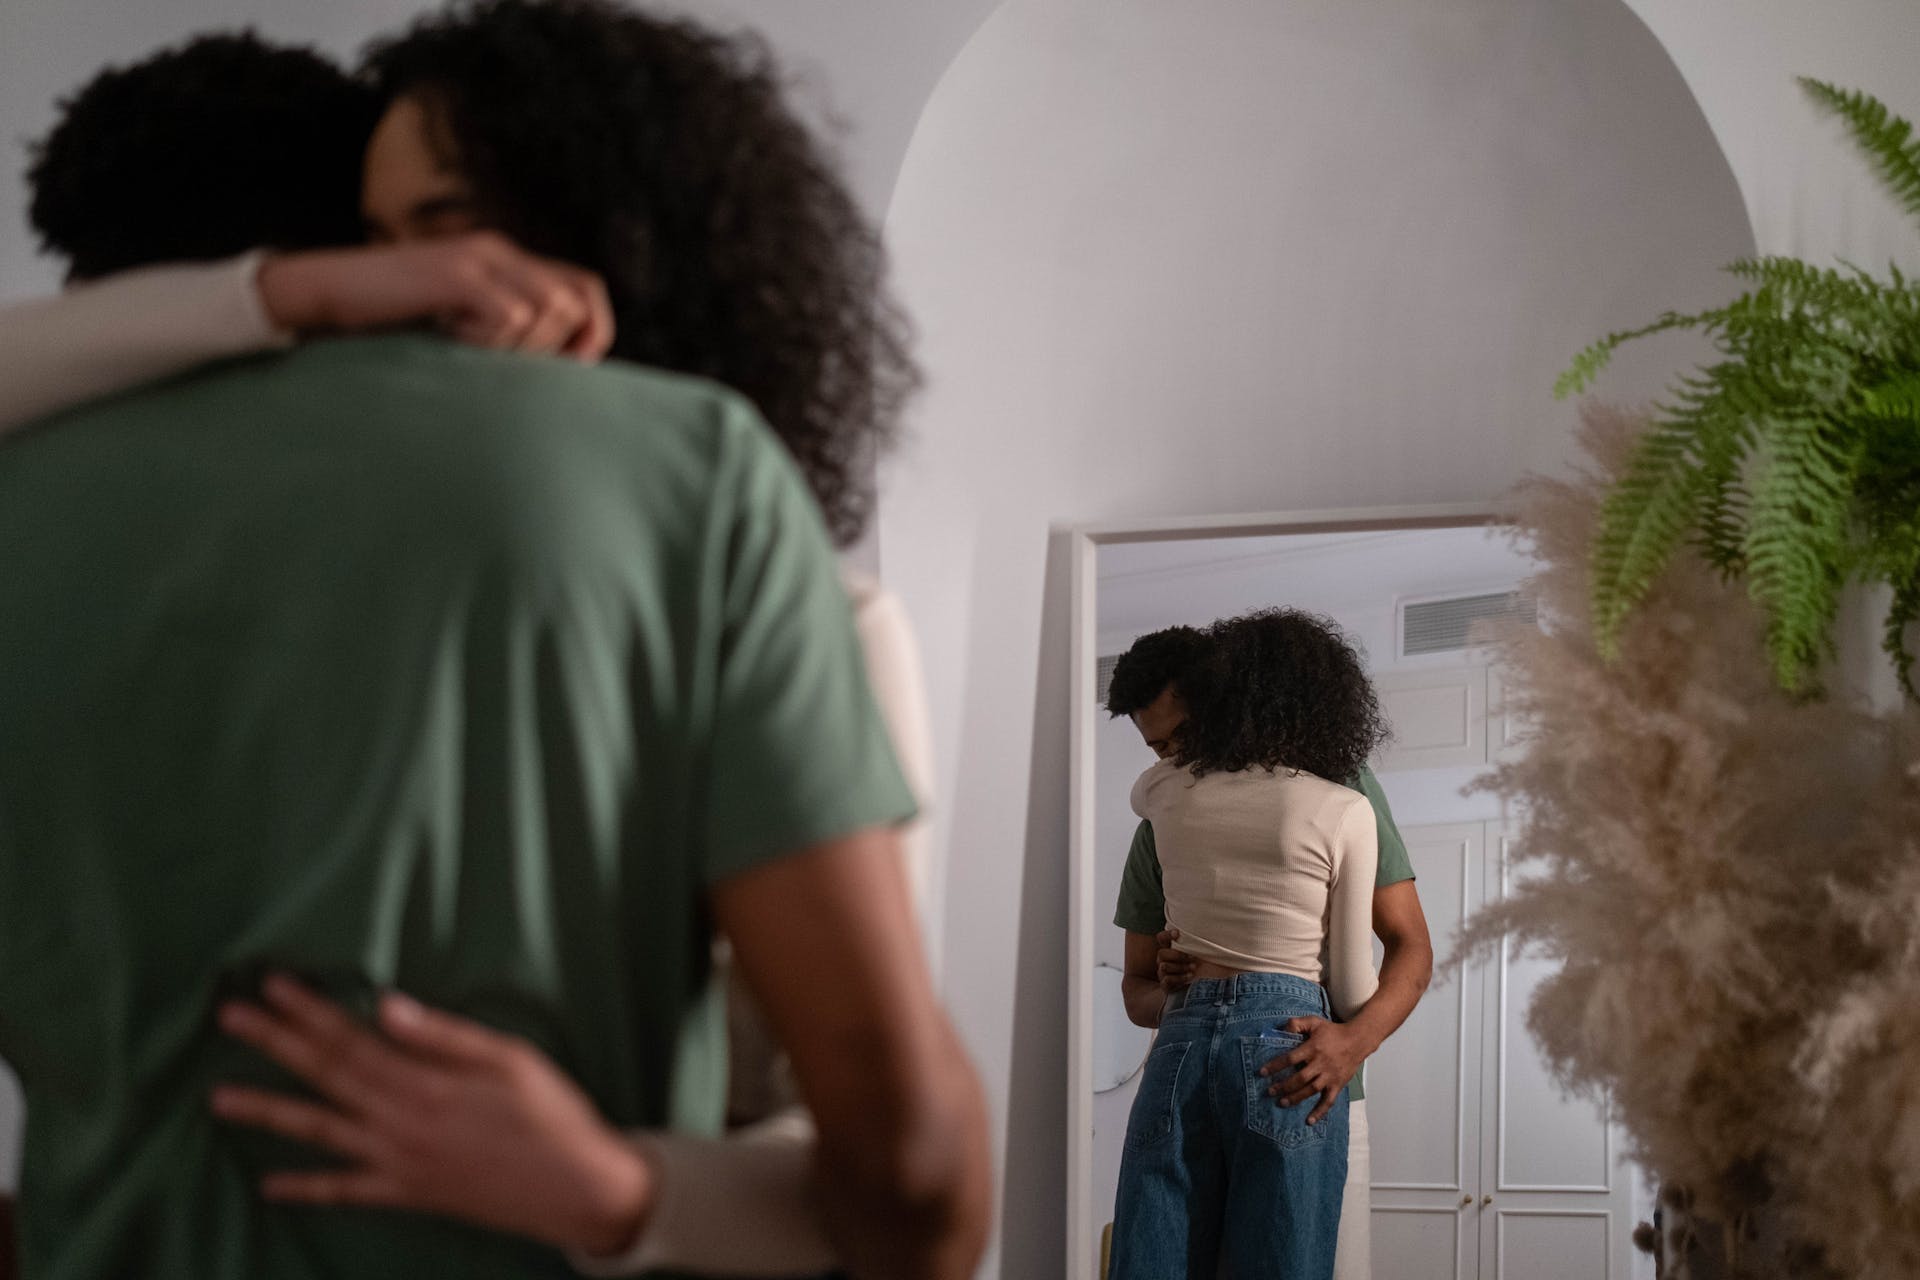 A couple hugging in front of a mirror | Source: Pexels